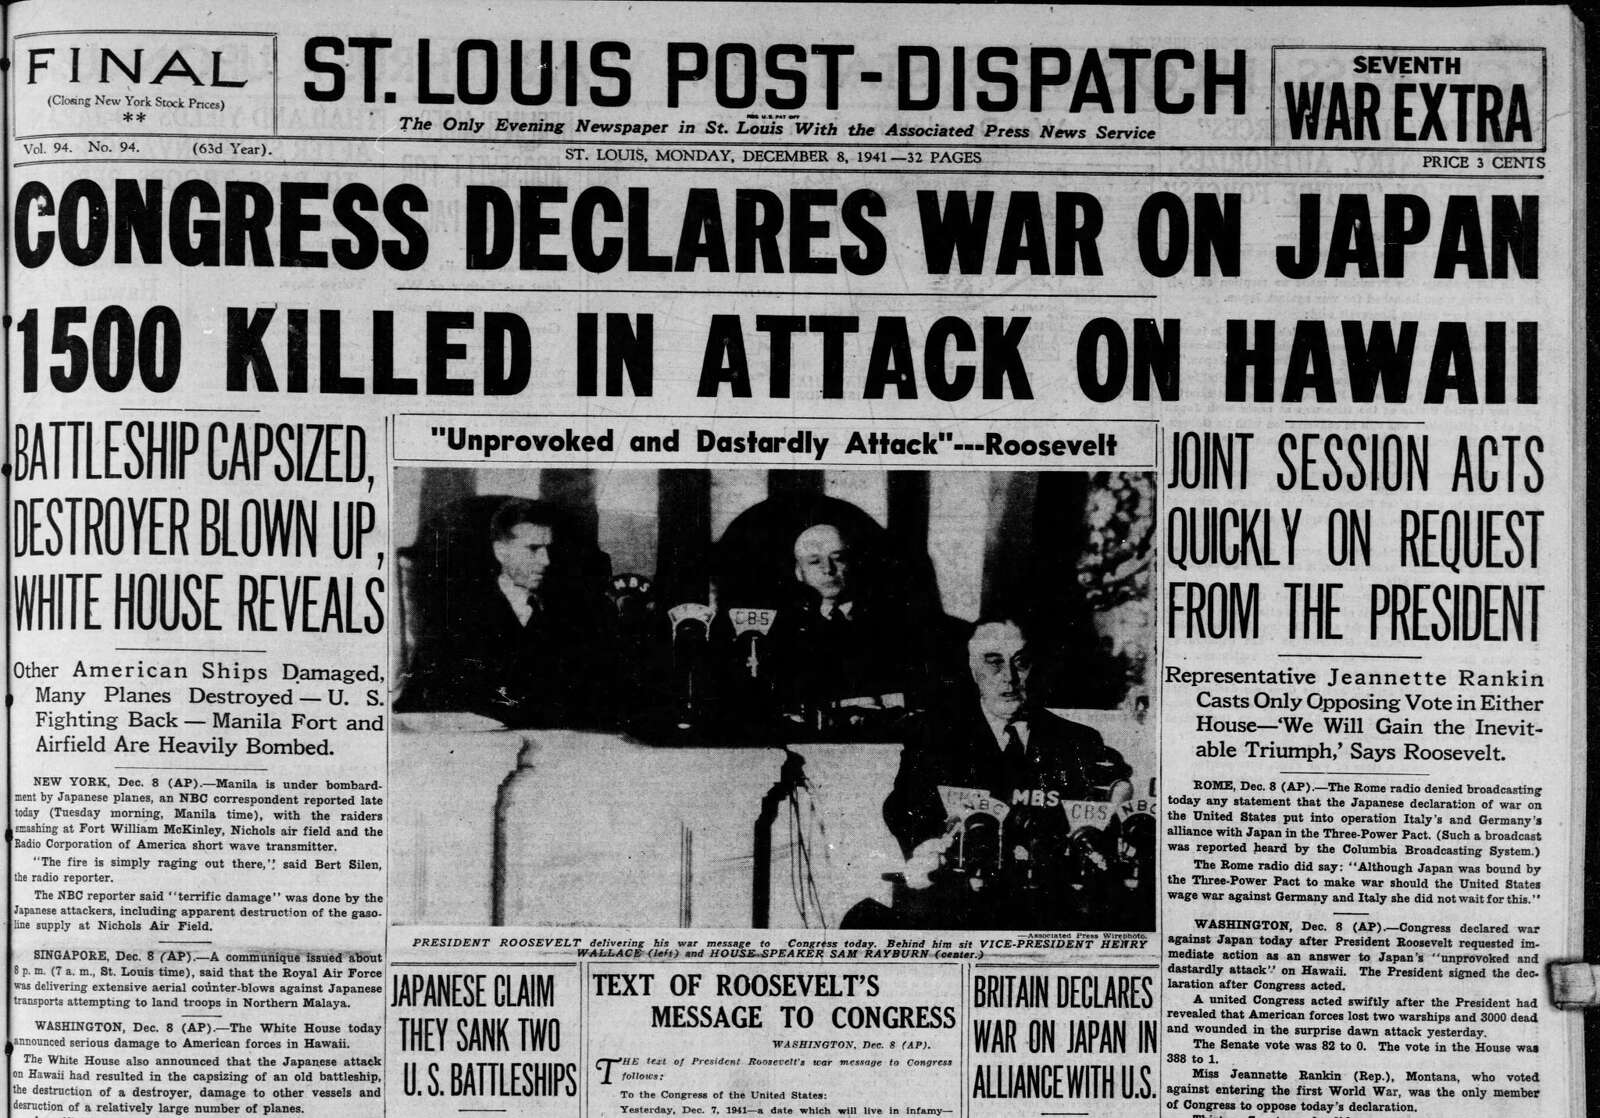 The St. Louis Post-Dispatch front page from December 8, 1941.